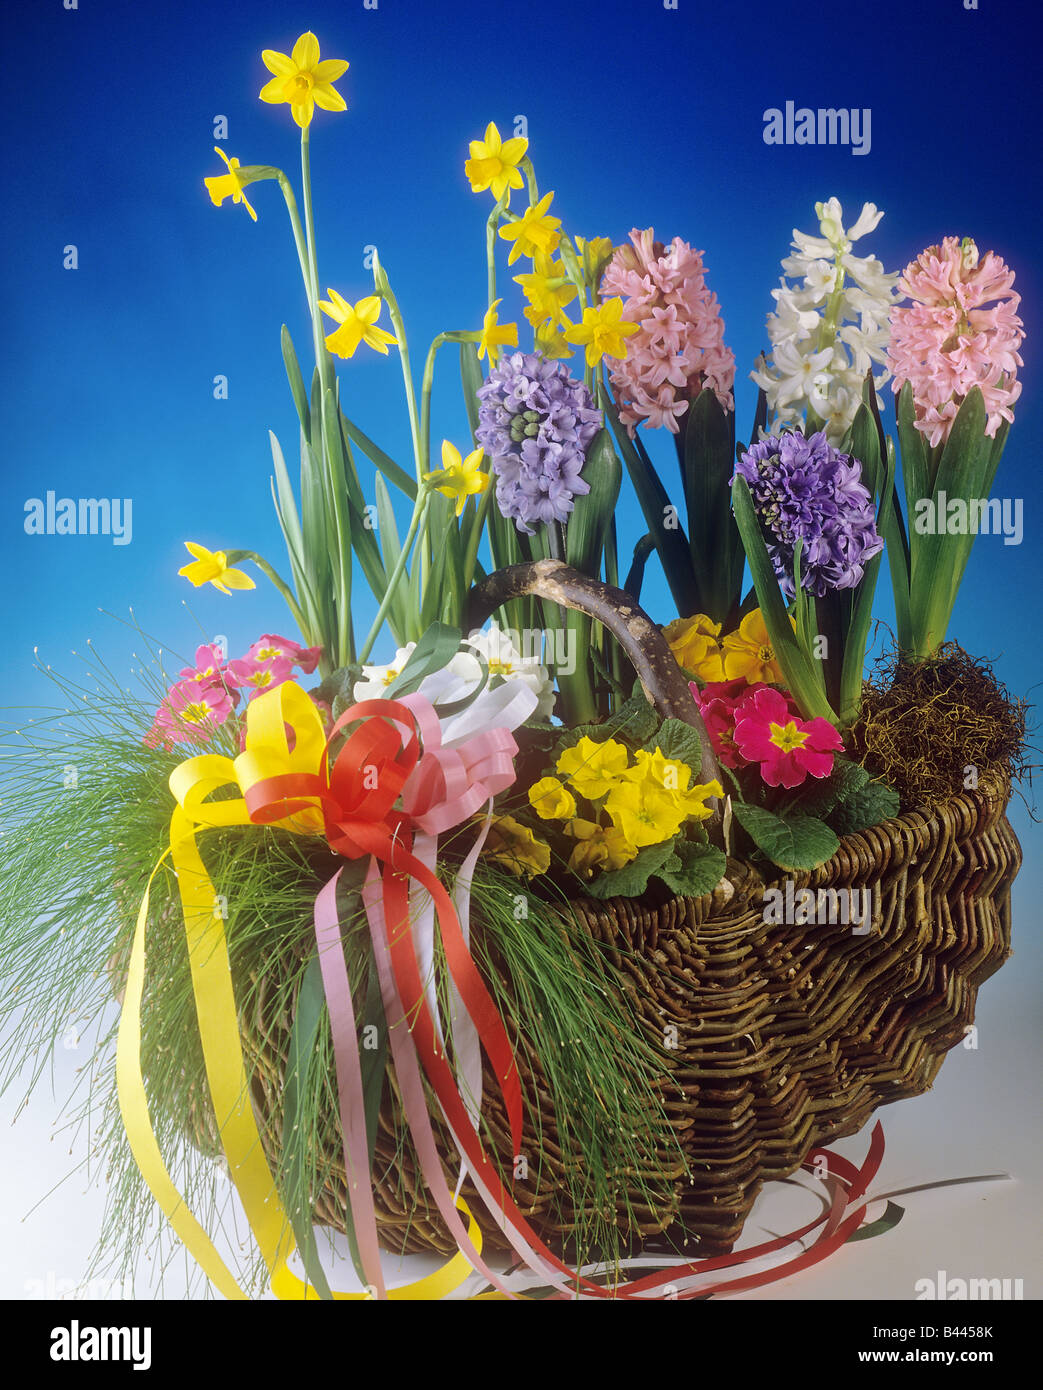 different flowers in basket Stock Photo